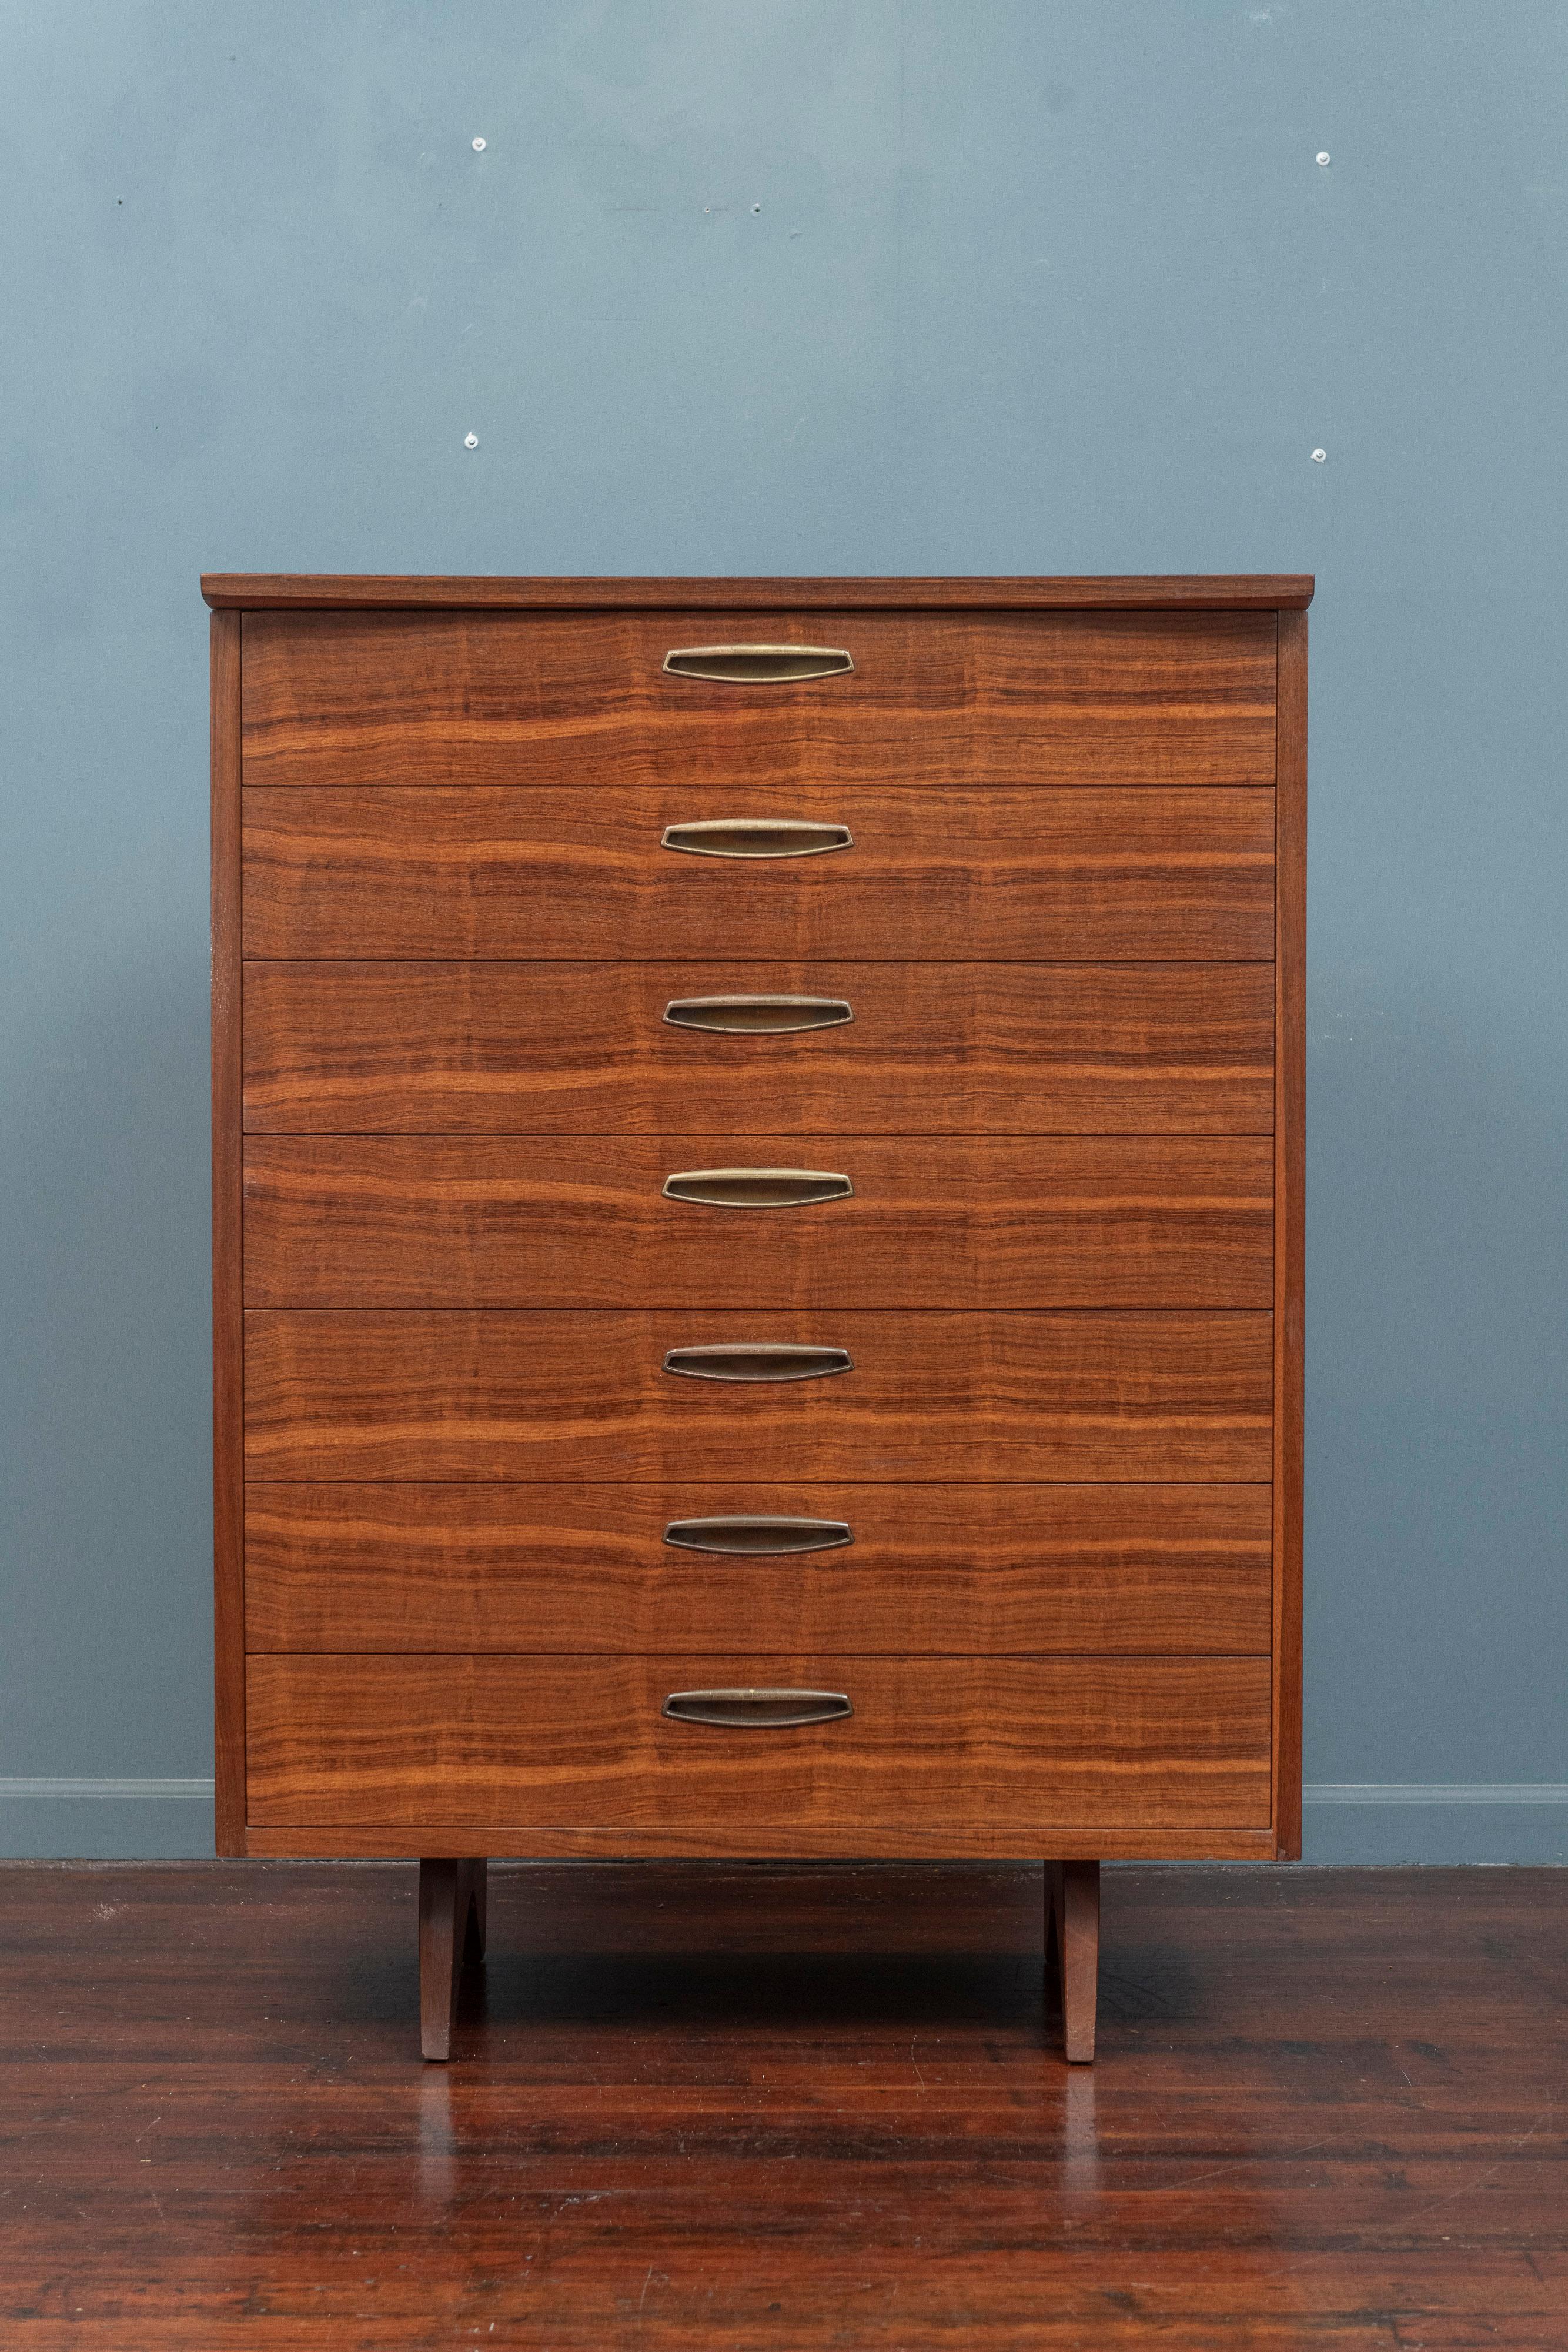 George Nakashima design tall chest or dresser for his 